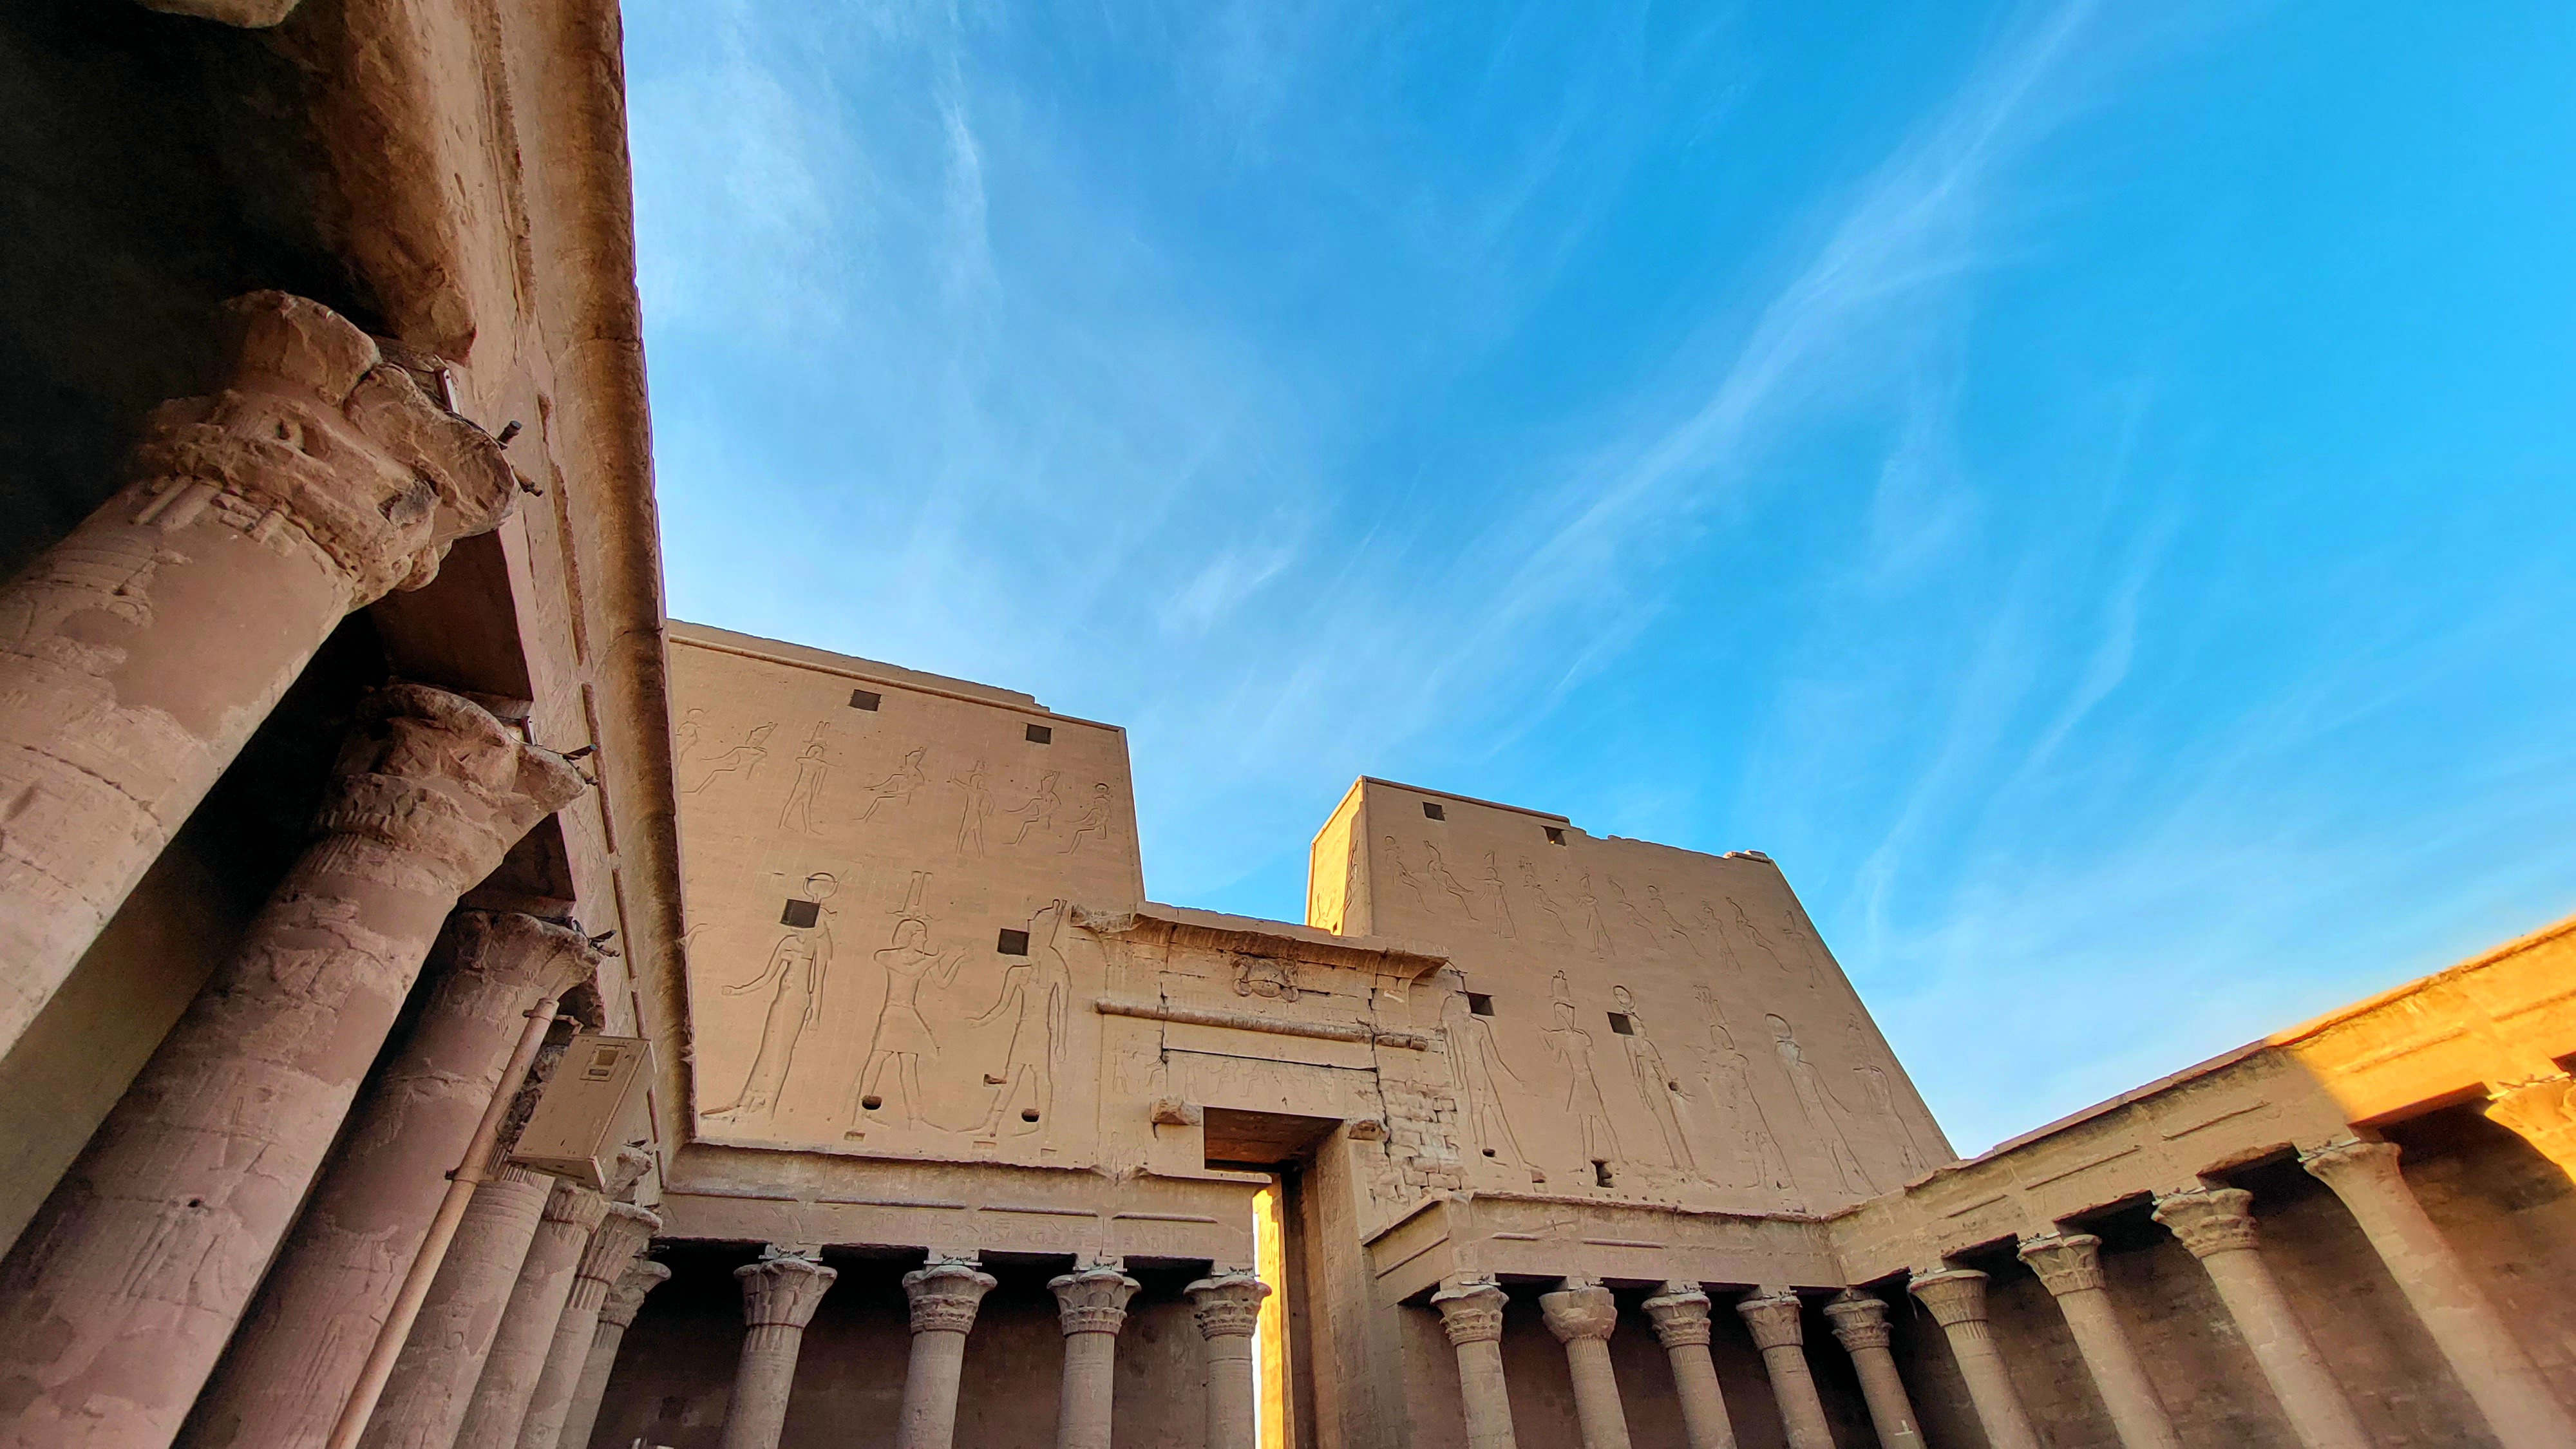 The perystile courtyard at Temple of Edfu